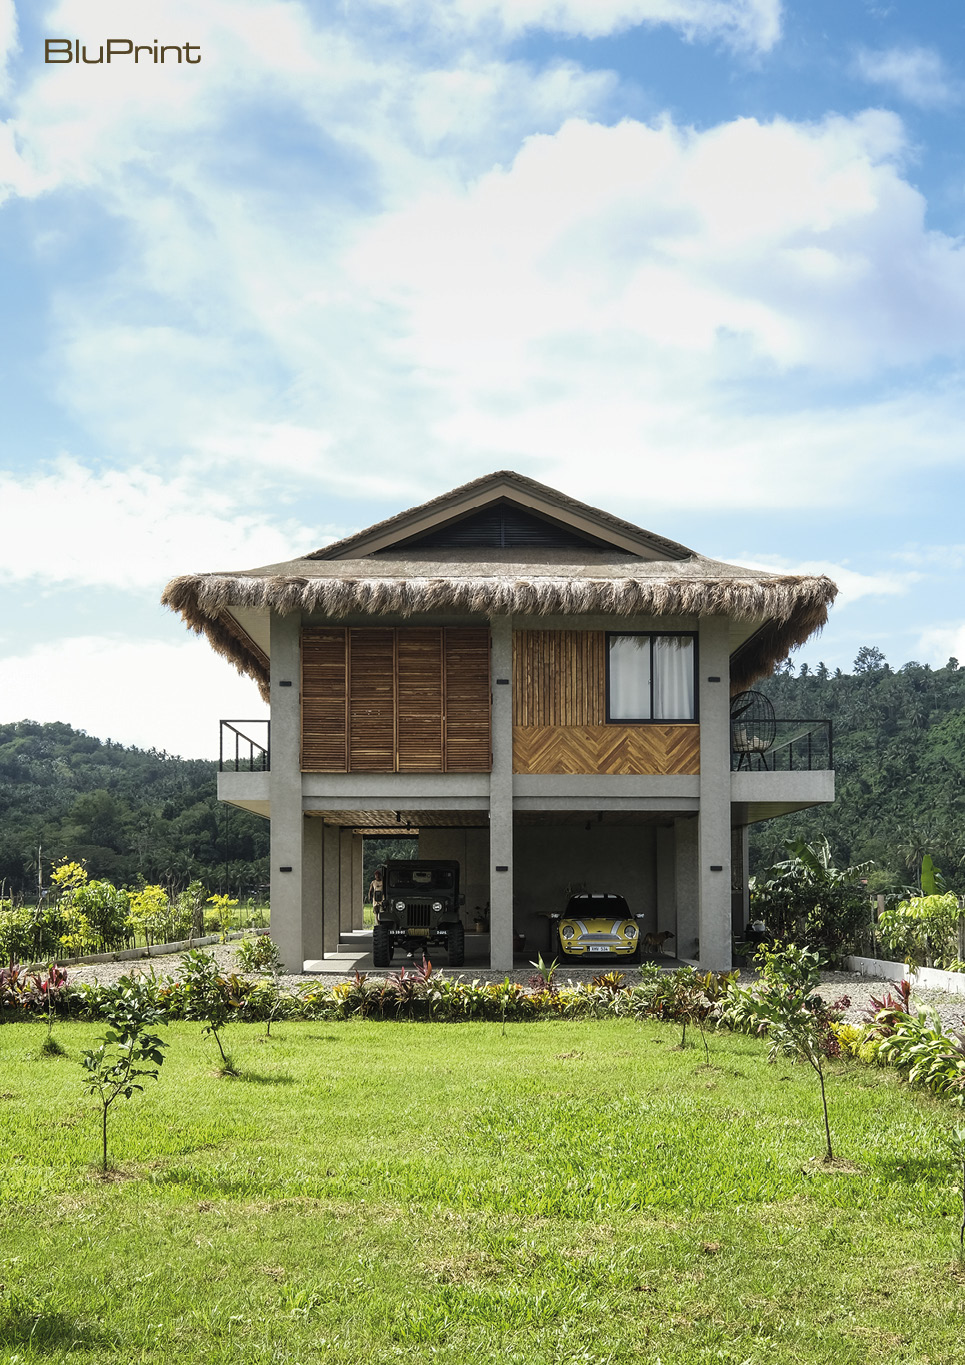 A side view of a modern bahay kubo on concrete stilts with a thatched roof.